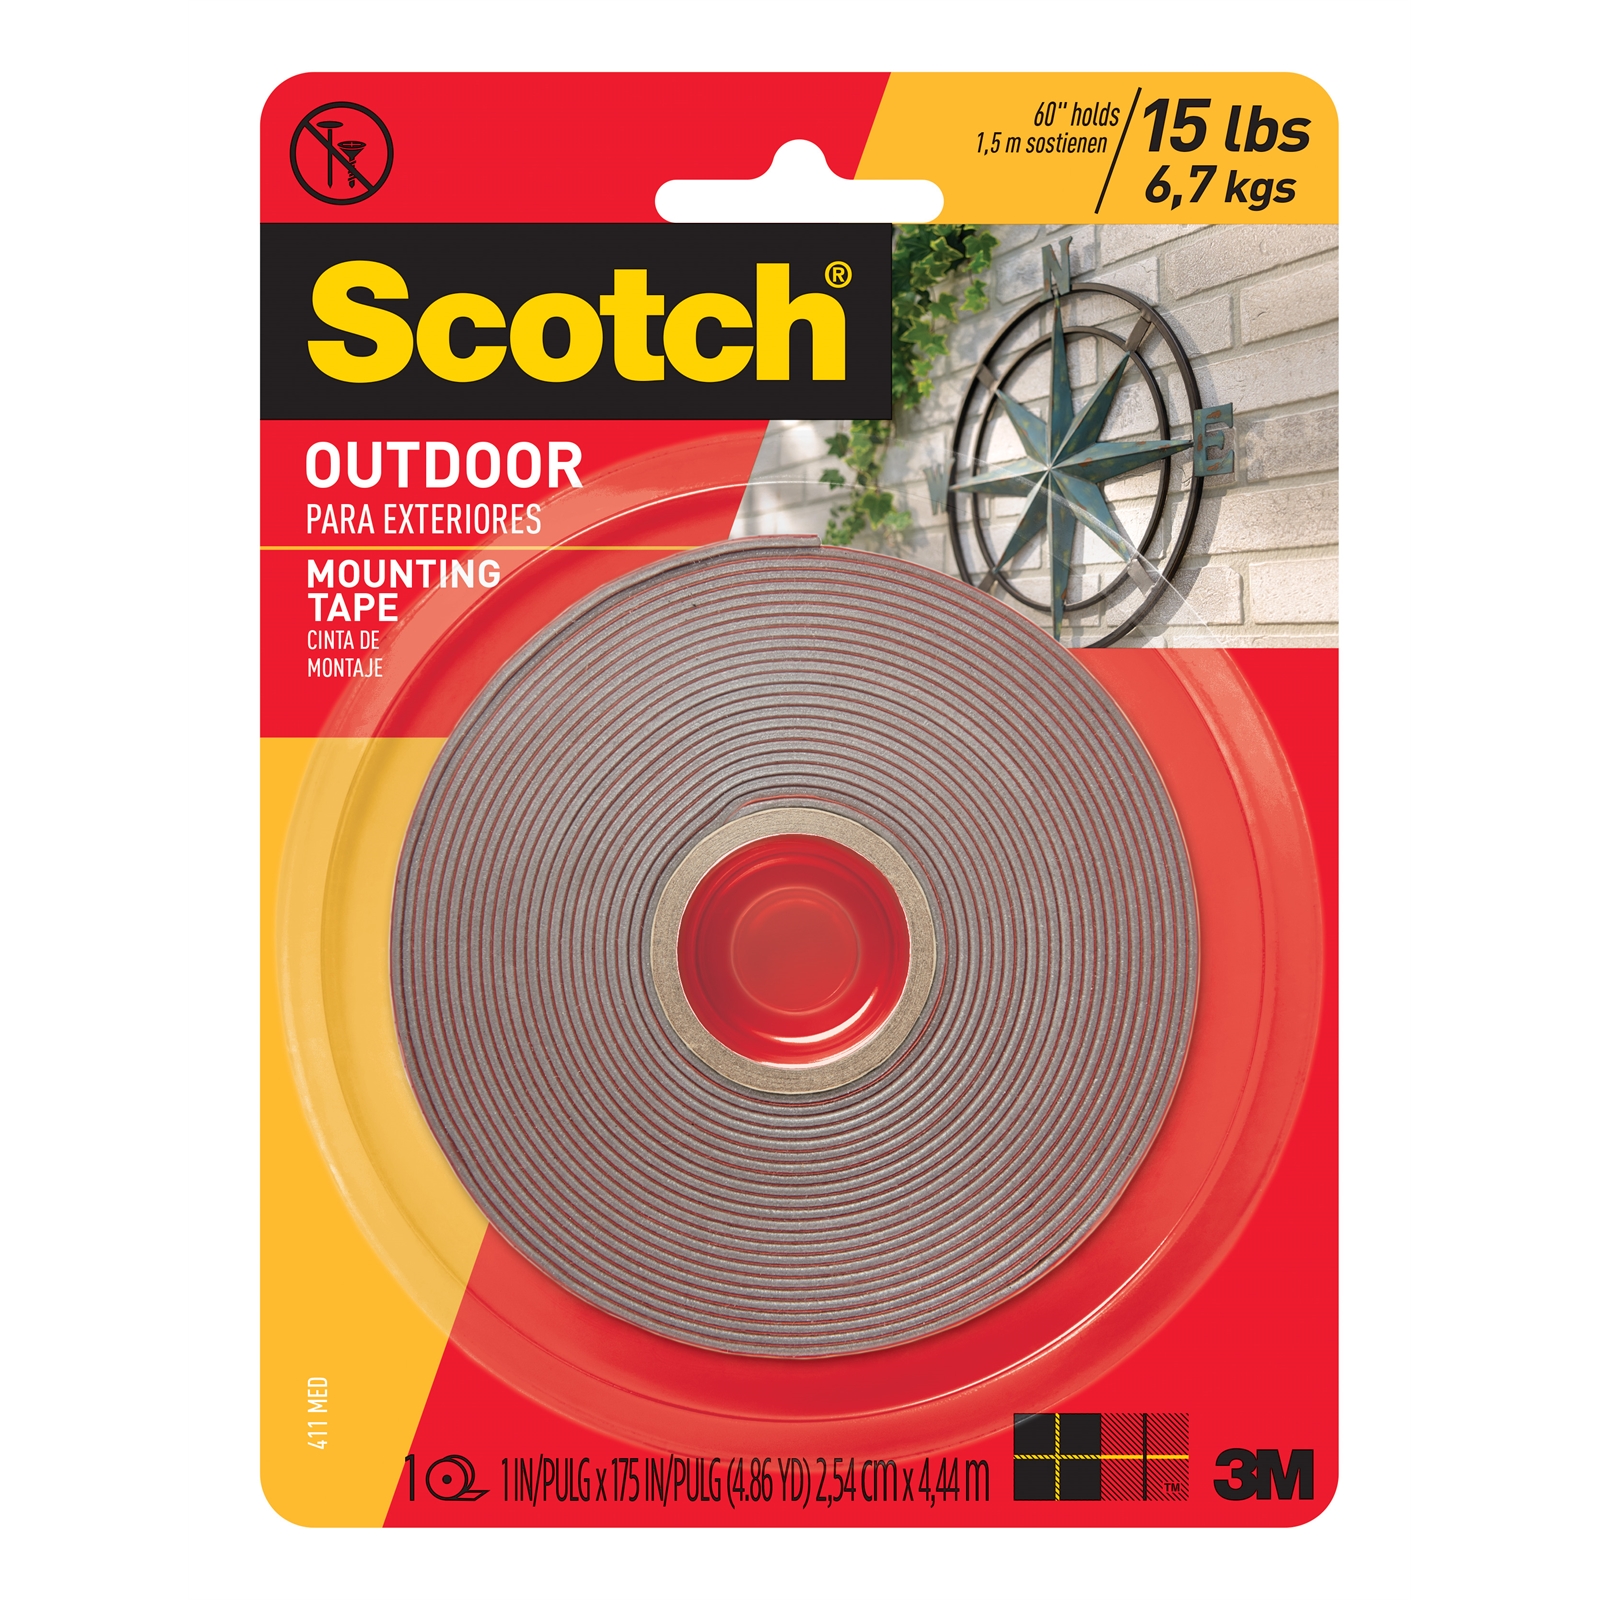 Scotch 2.5cm x 4.4.m Outoor Mounting Tape